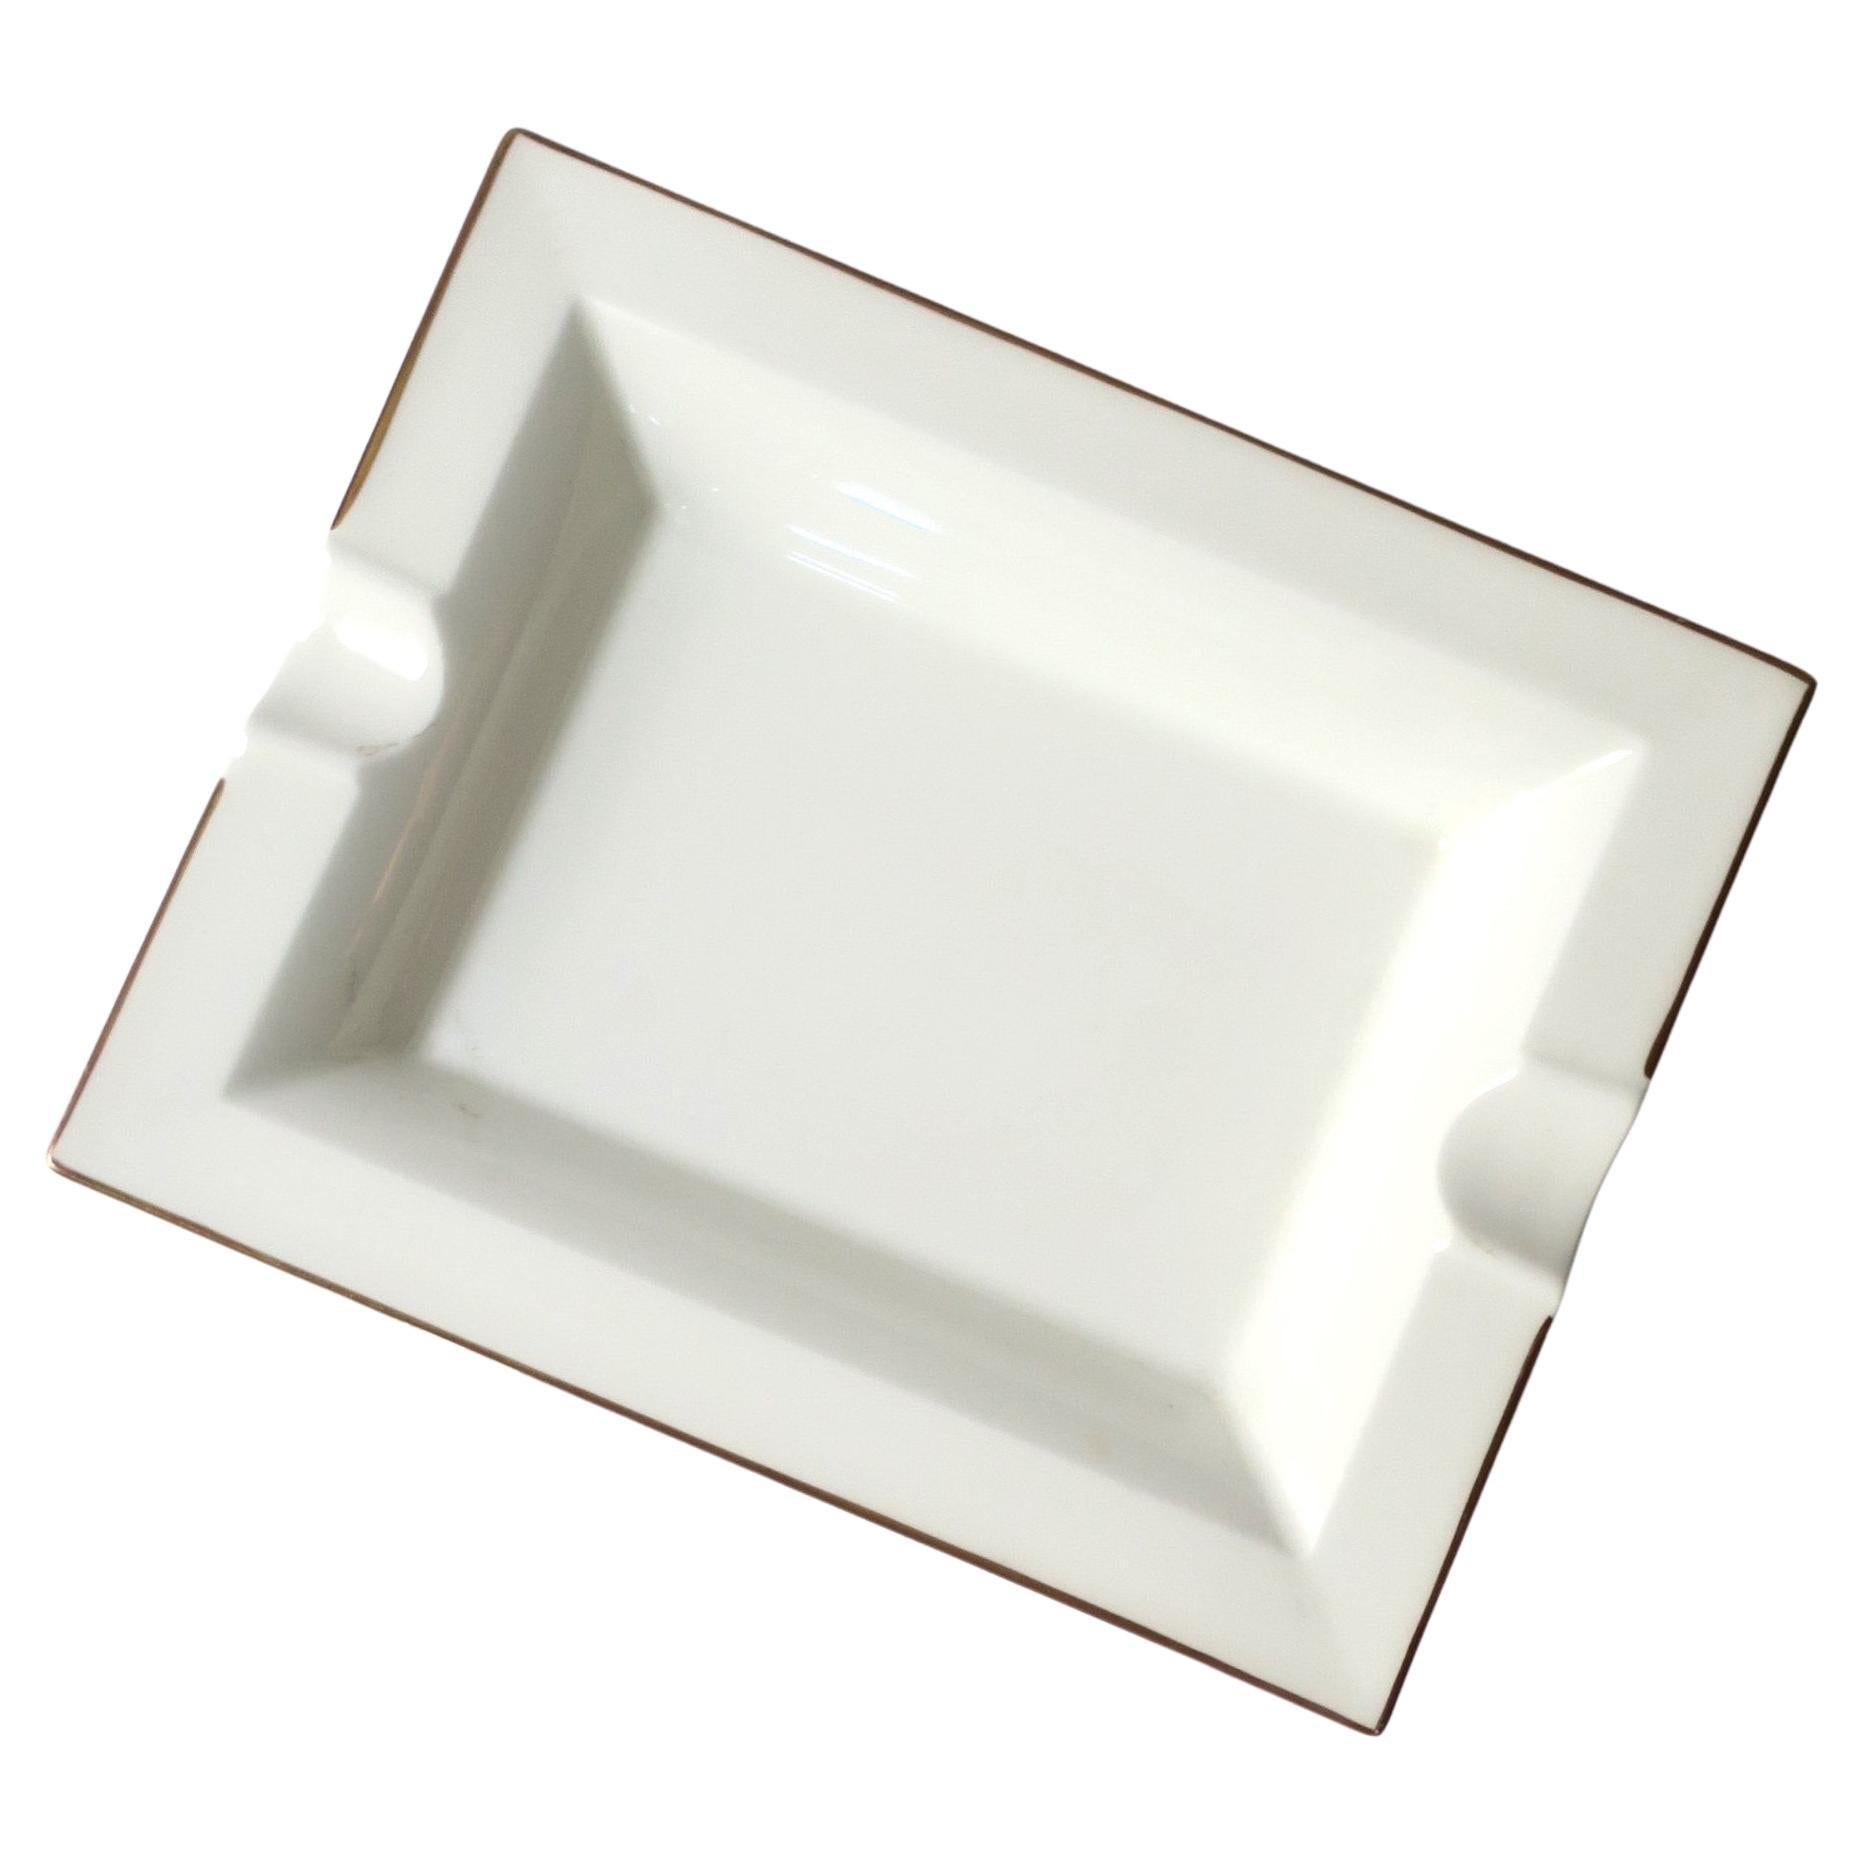 Porcelain Jewelry Tray Catchall Vide-Poche or Cigar Ashtray German White & Gold 